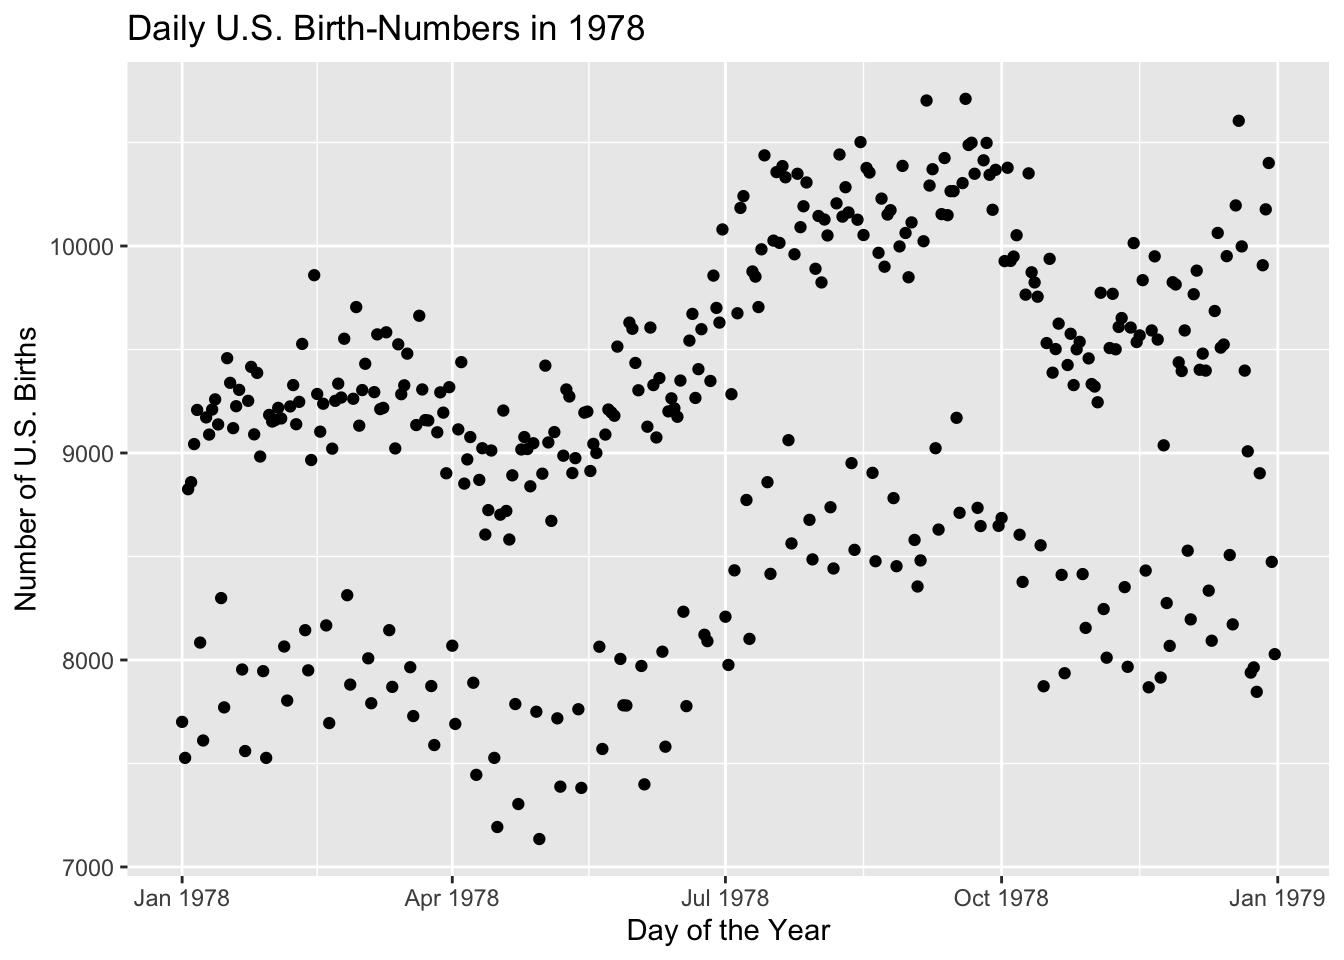 Some of the days have significantly fewer births.  What's going on?